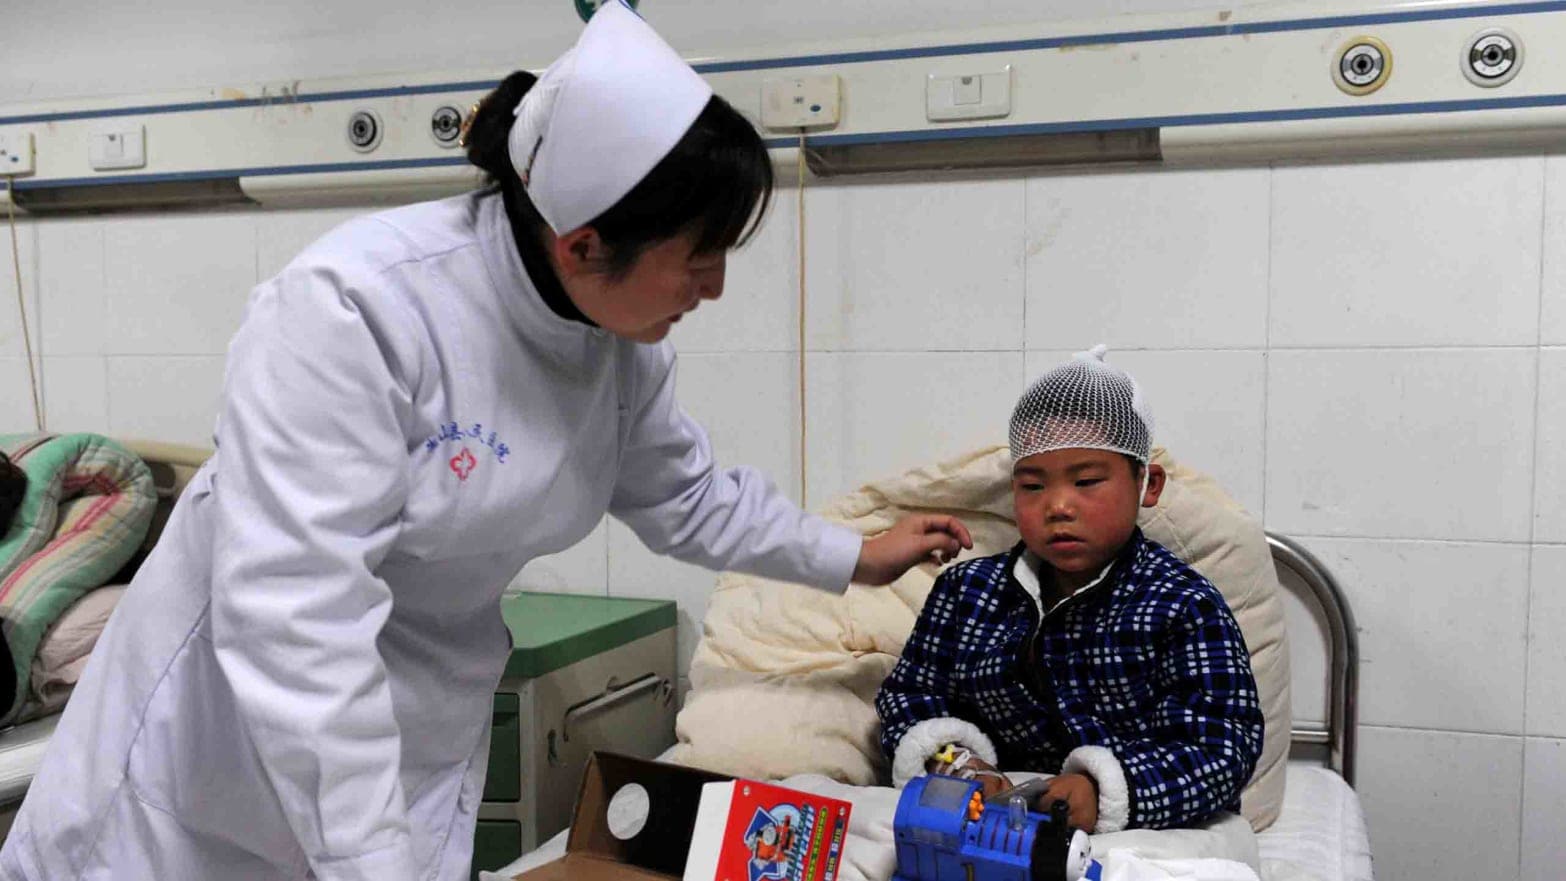 One of the child victims of a stabbing in China in 2017